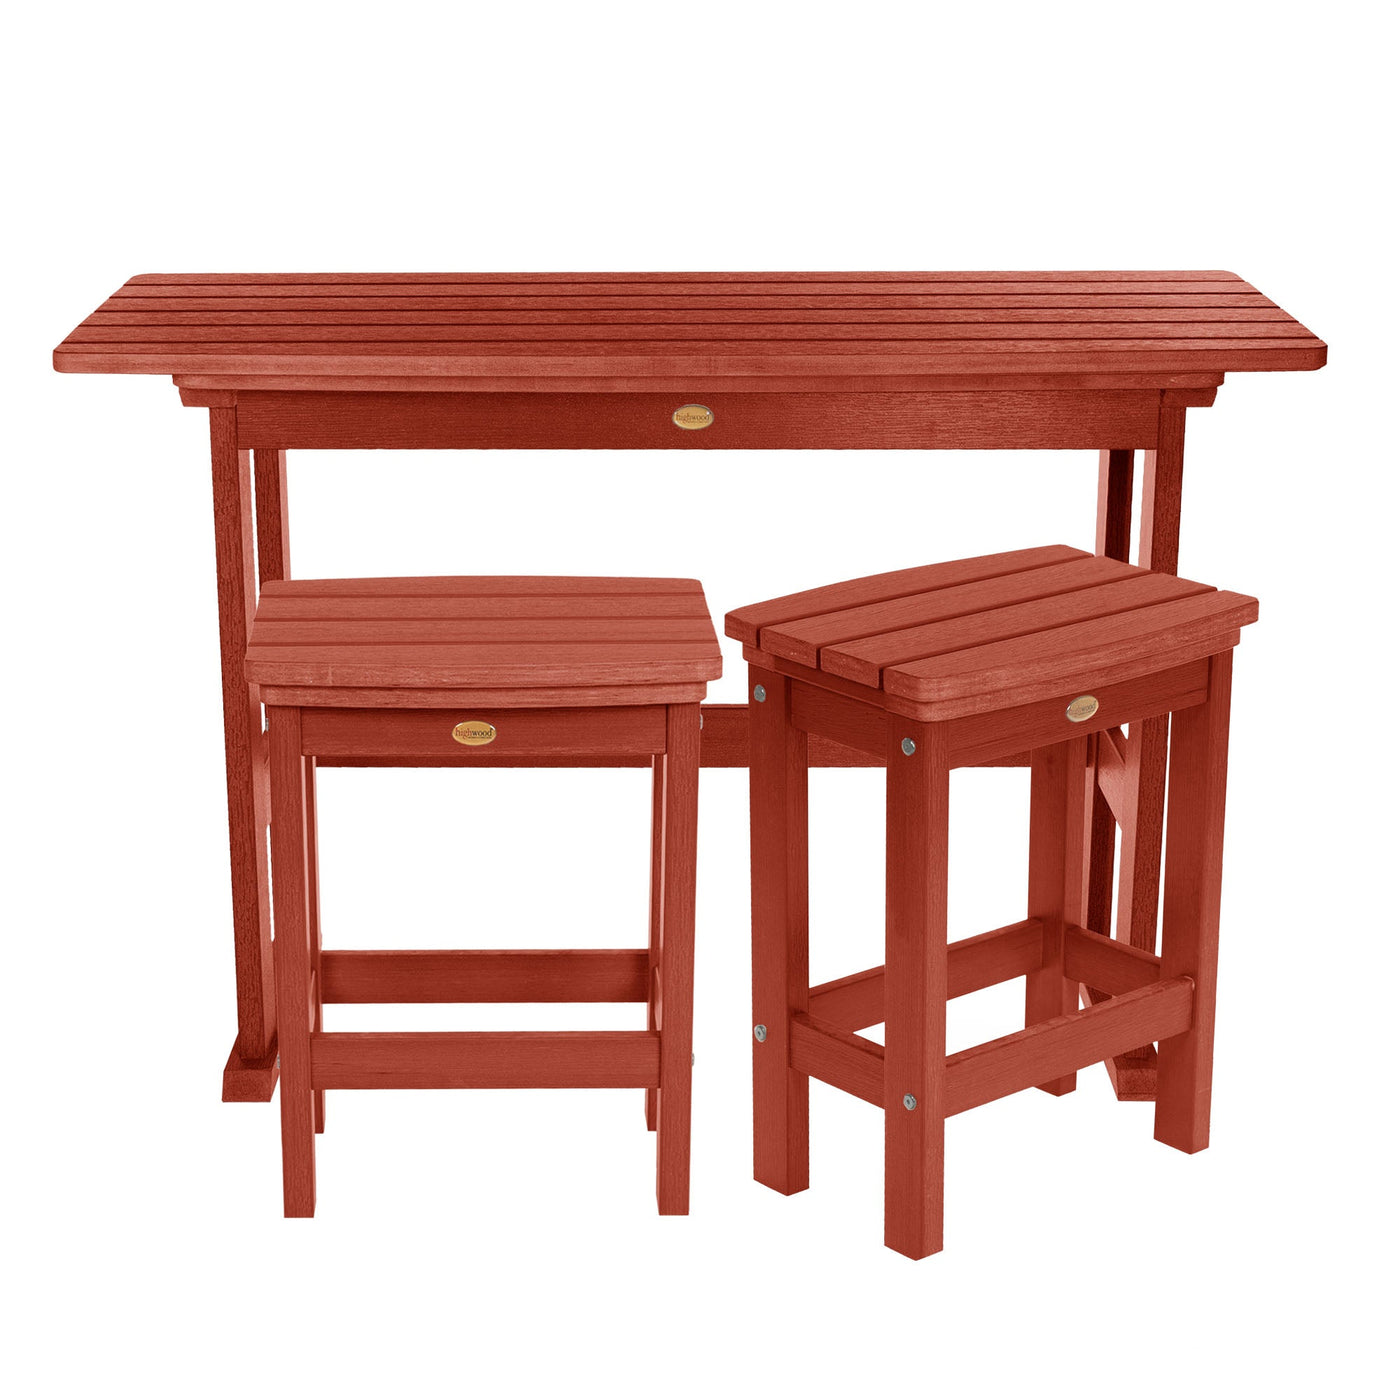 Lehigh 3pc Counter Height Balcony Set Dining Highwood USA Rustic Red 